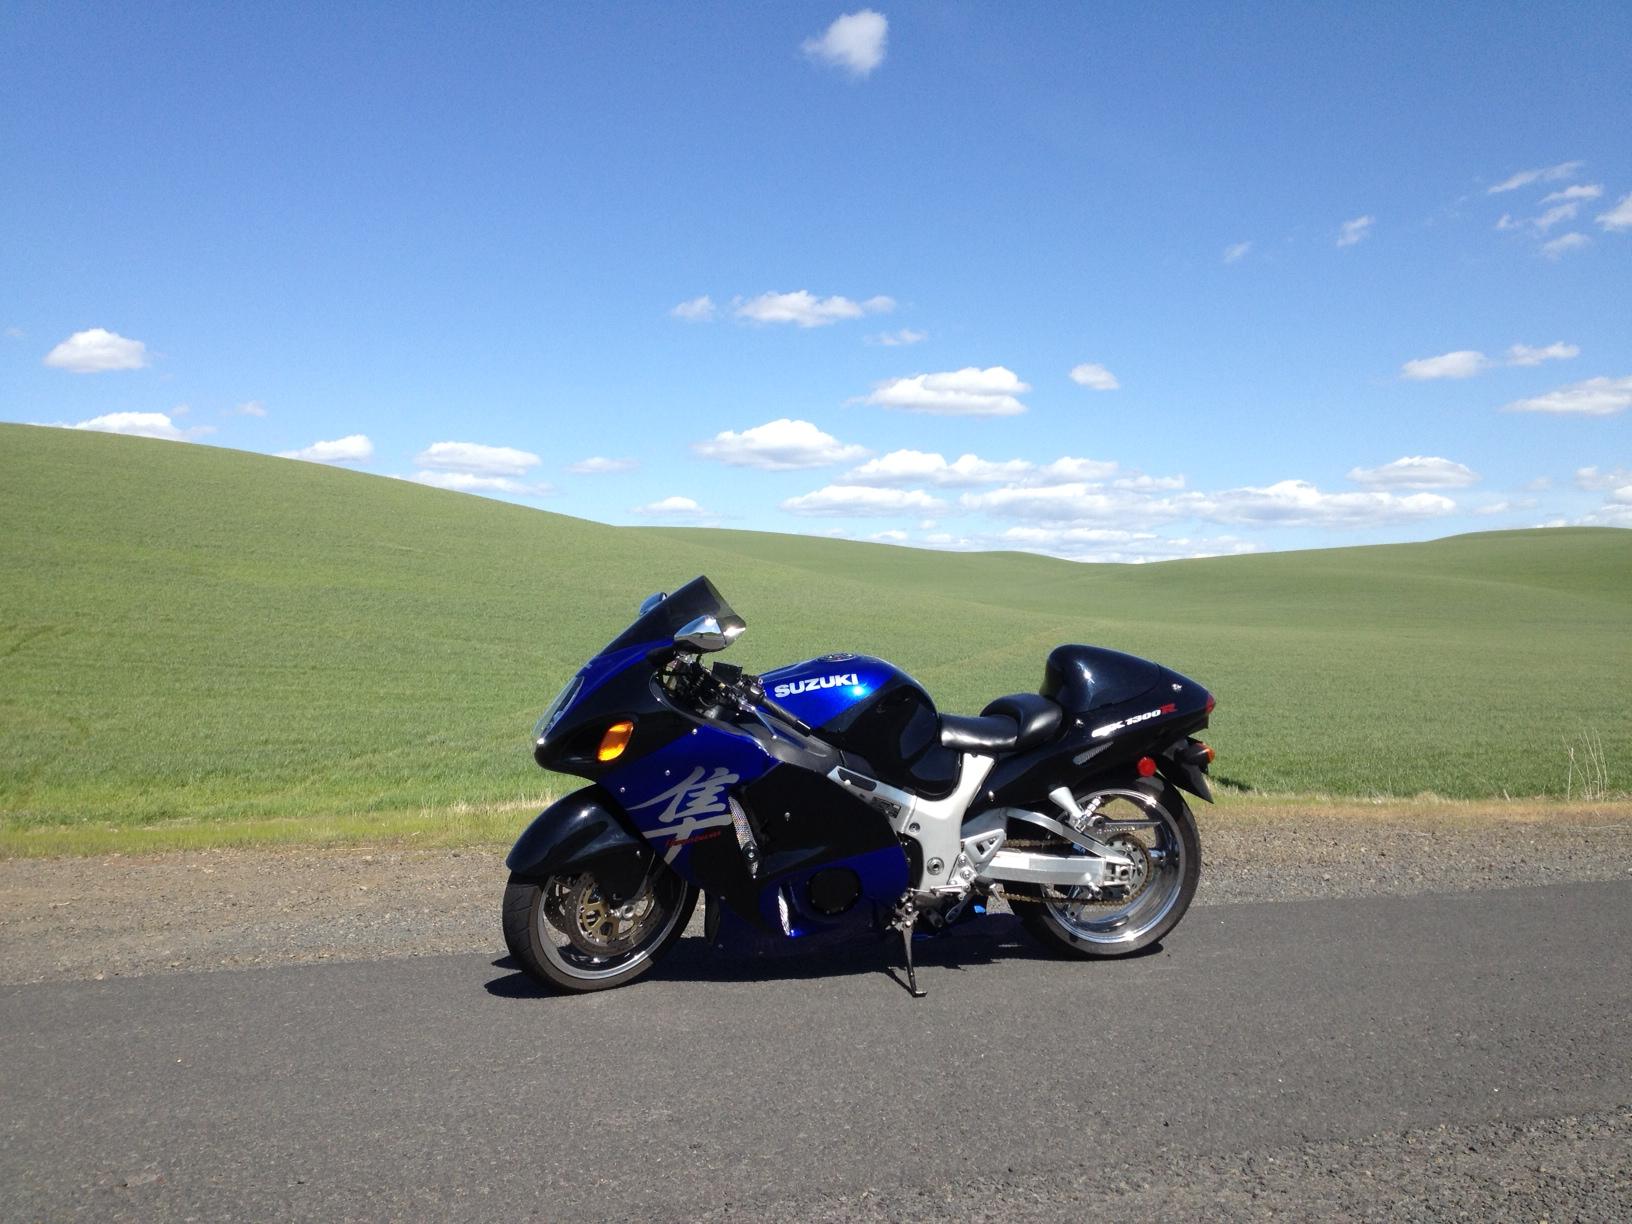 Took a ride and suddenly found myself in a Windows XP background